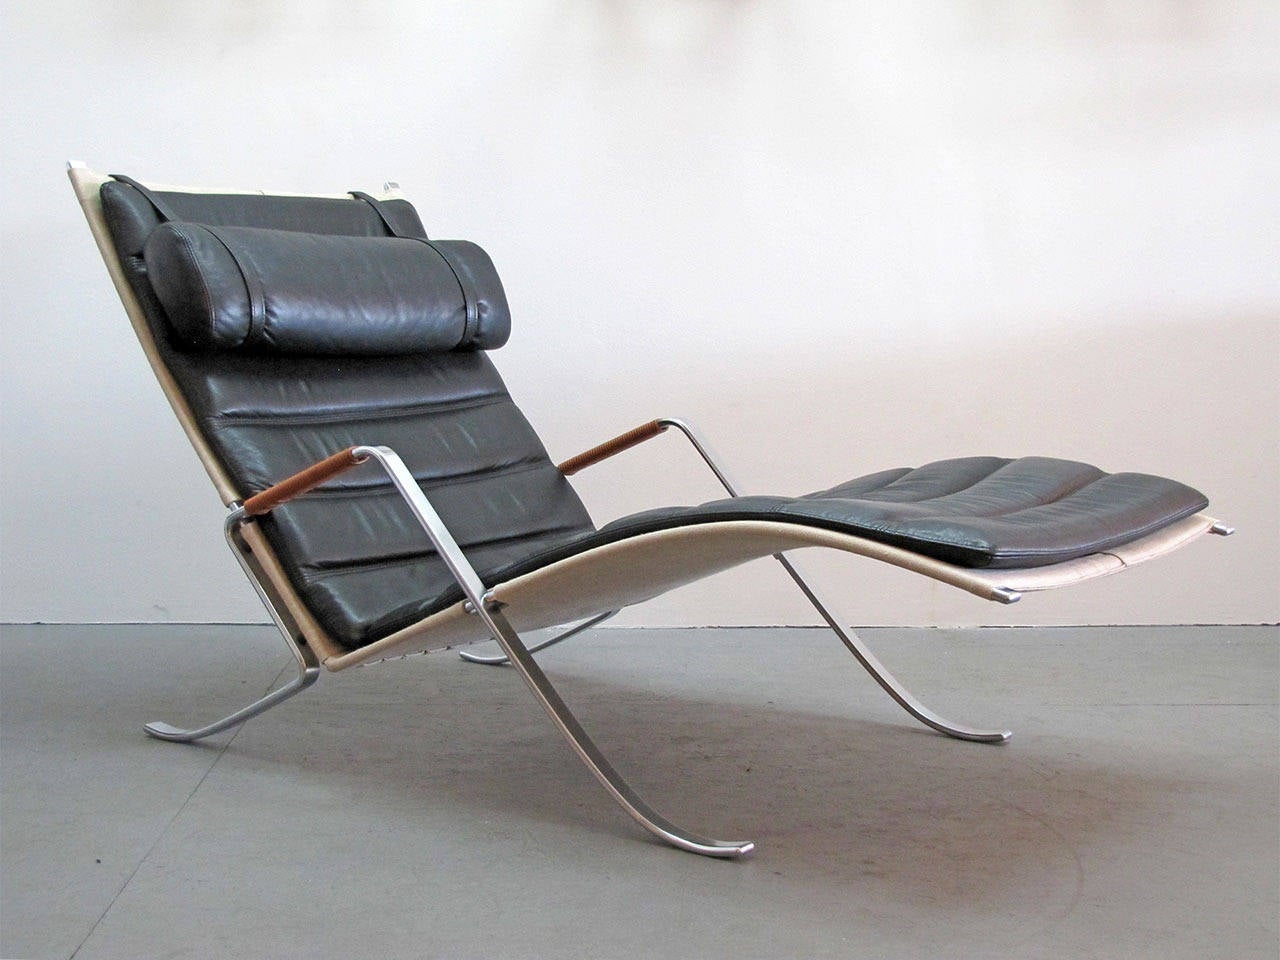 "Grasshopper" chaise longue designed by Preben Fabricius and Jørgen Kastholm, manufactured by Lange, chrome plated steel with canvas and loose neck support and cushions in black leather.